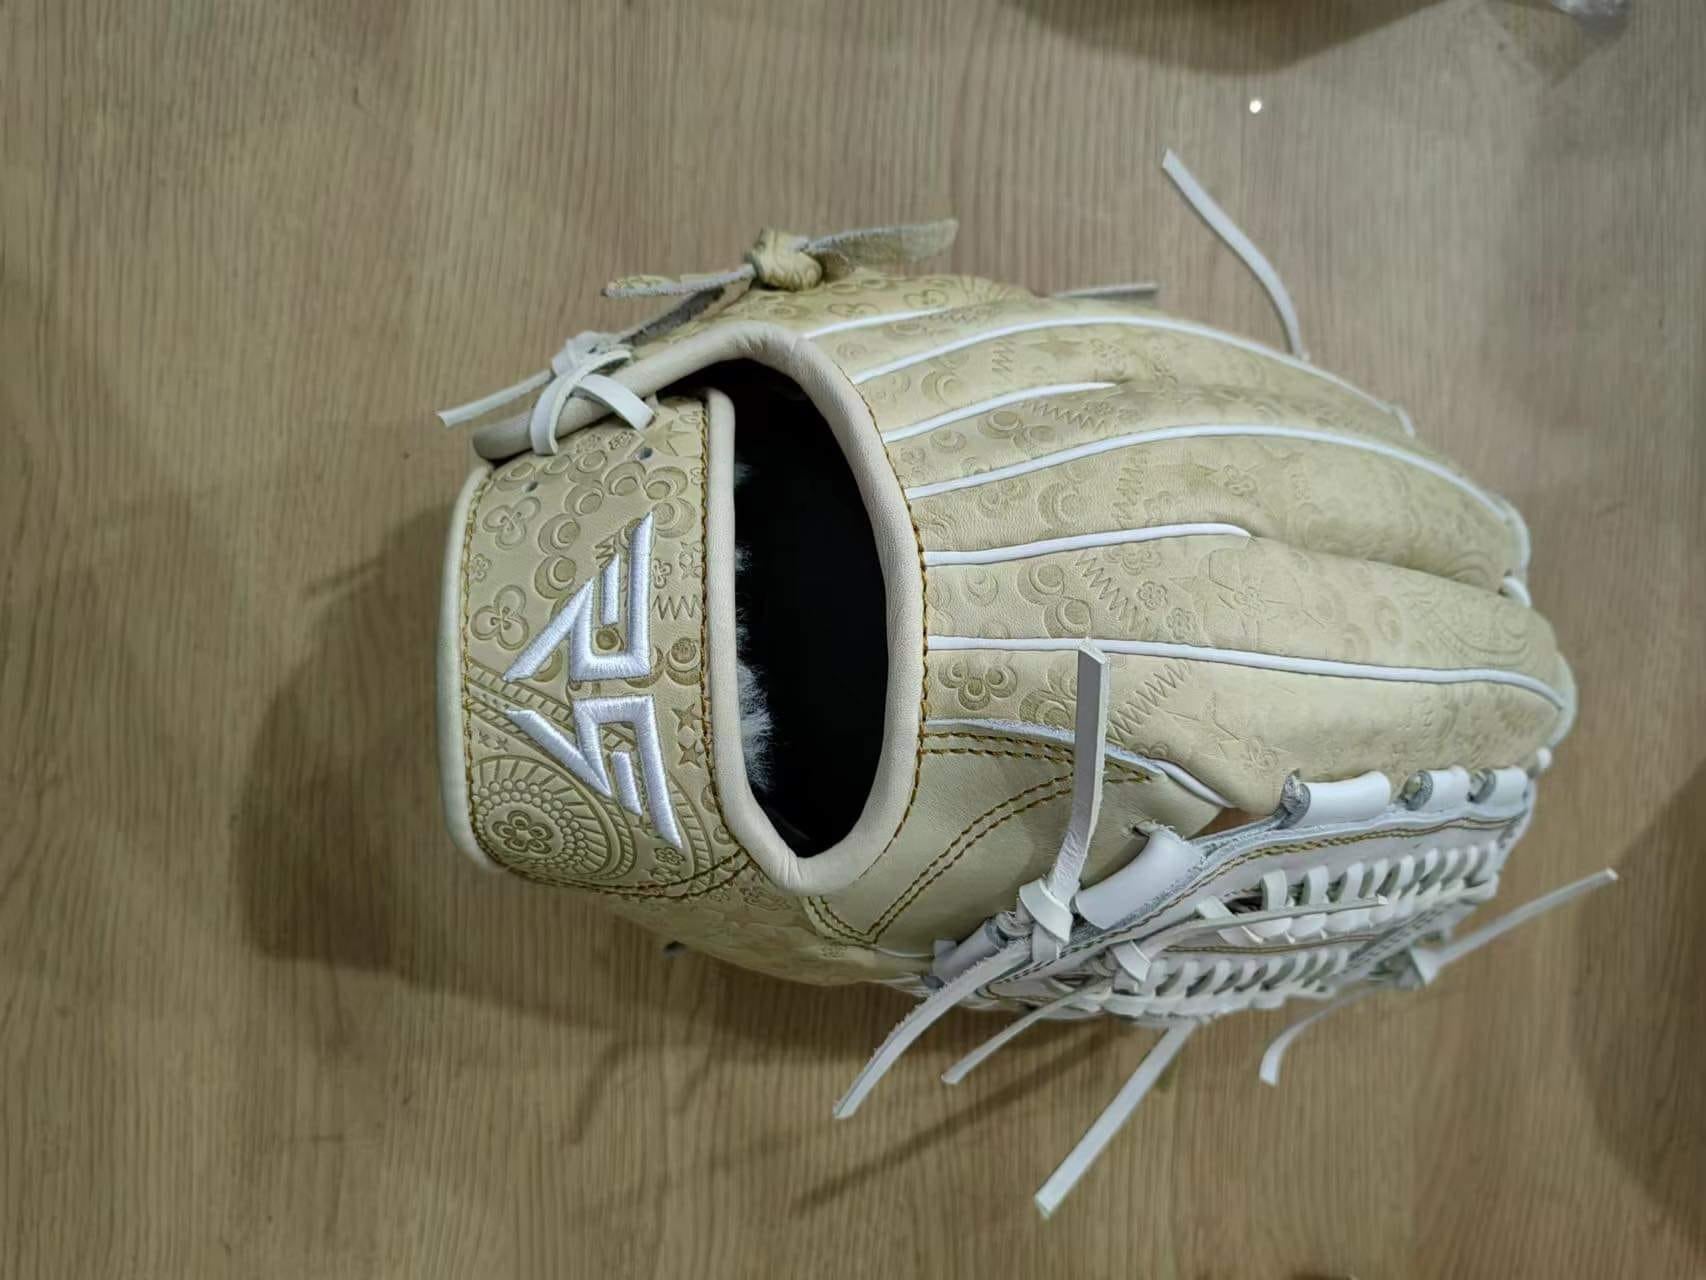 What To Look For in a Fielding Baseball Glove